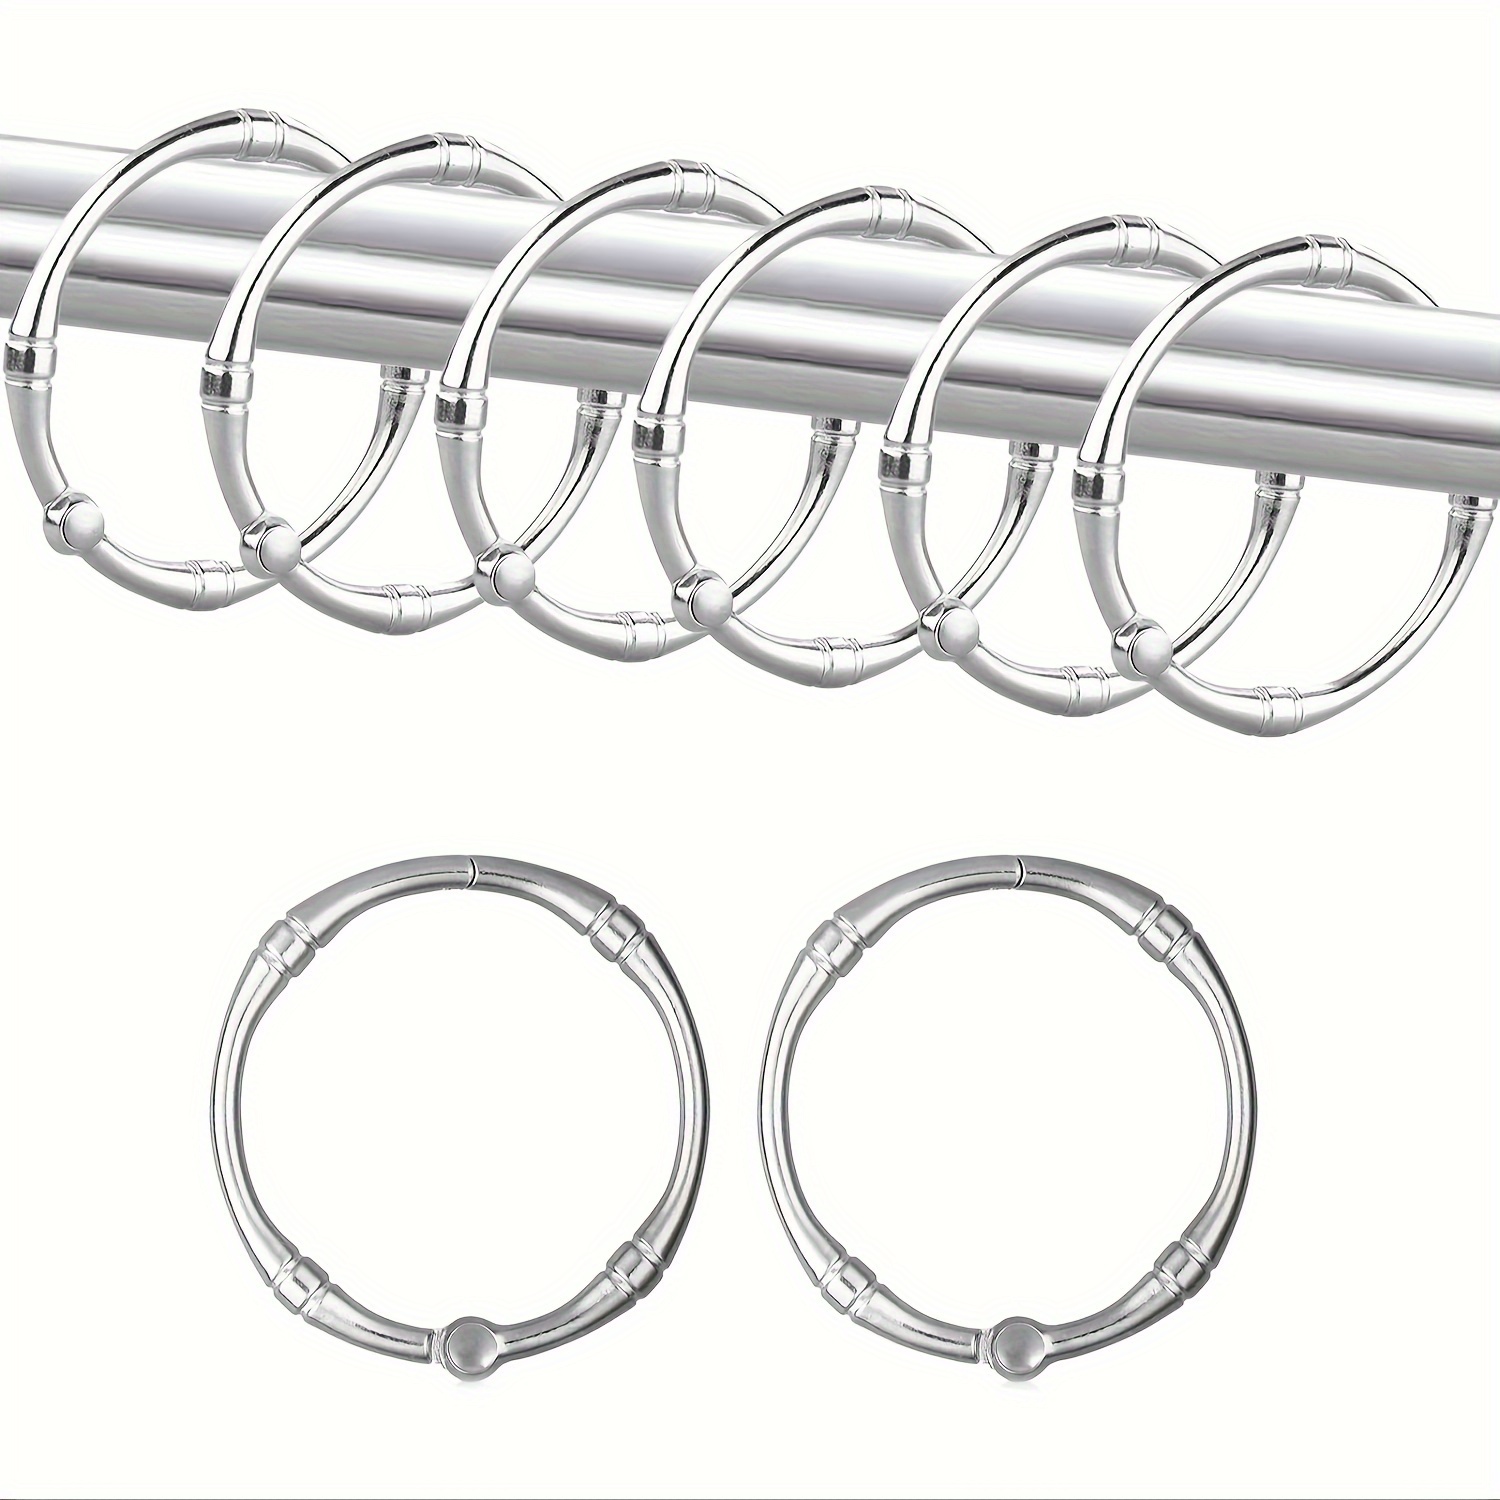 12pcs Round Shower Curtain Hook Ring, Metal Rustproof Shower Curtain Hook  For Bathroom Shower Curtain And Rod, Bathroom Accessories